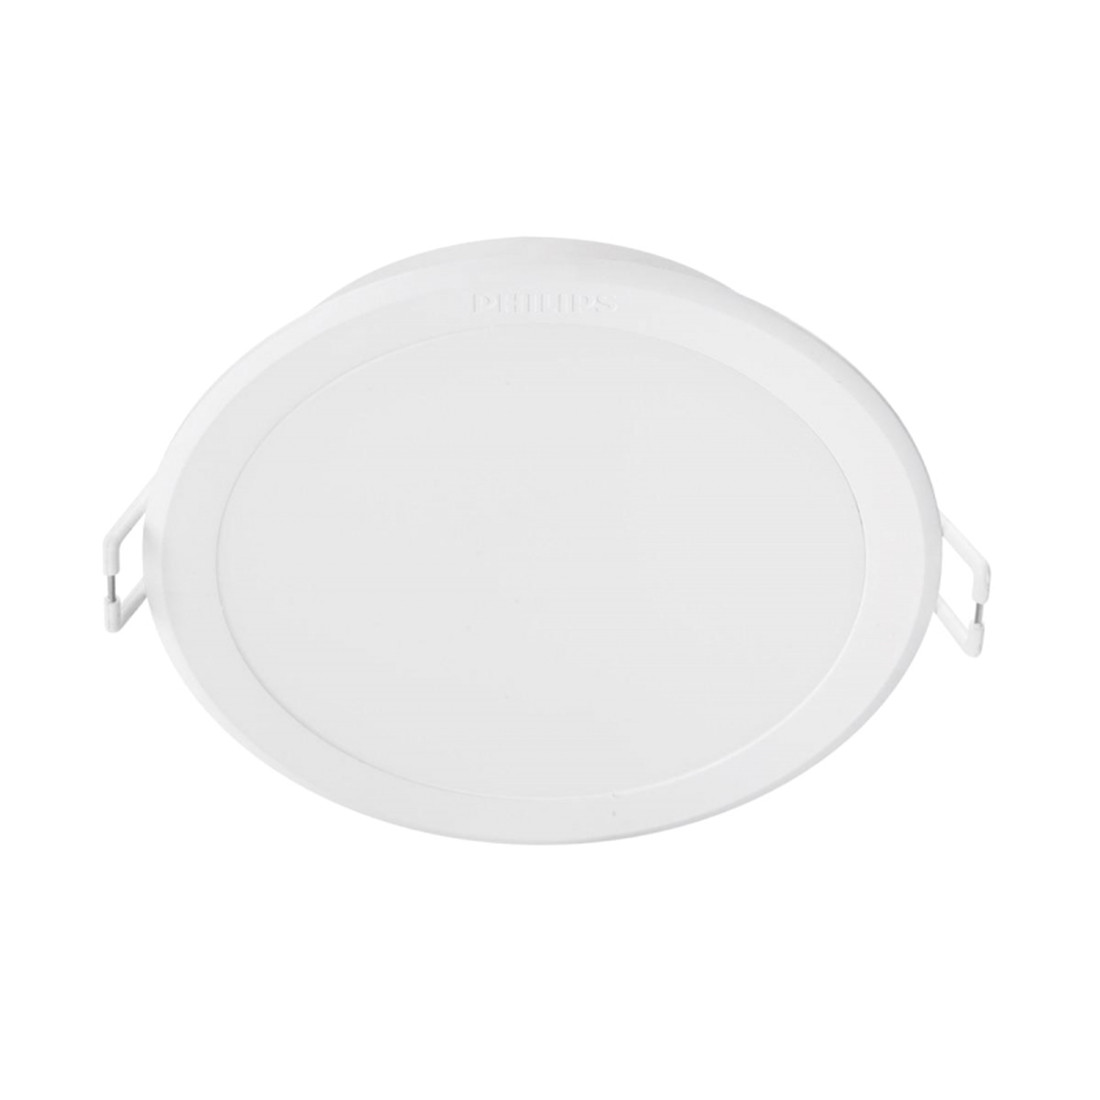 Светильник Philips 59471 MESON 200 24W 40K WH recessed LED 2-014566 915005749901